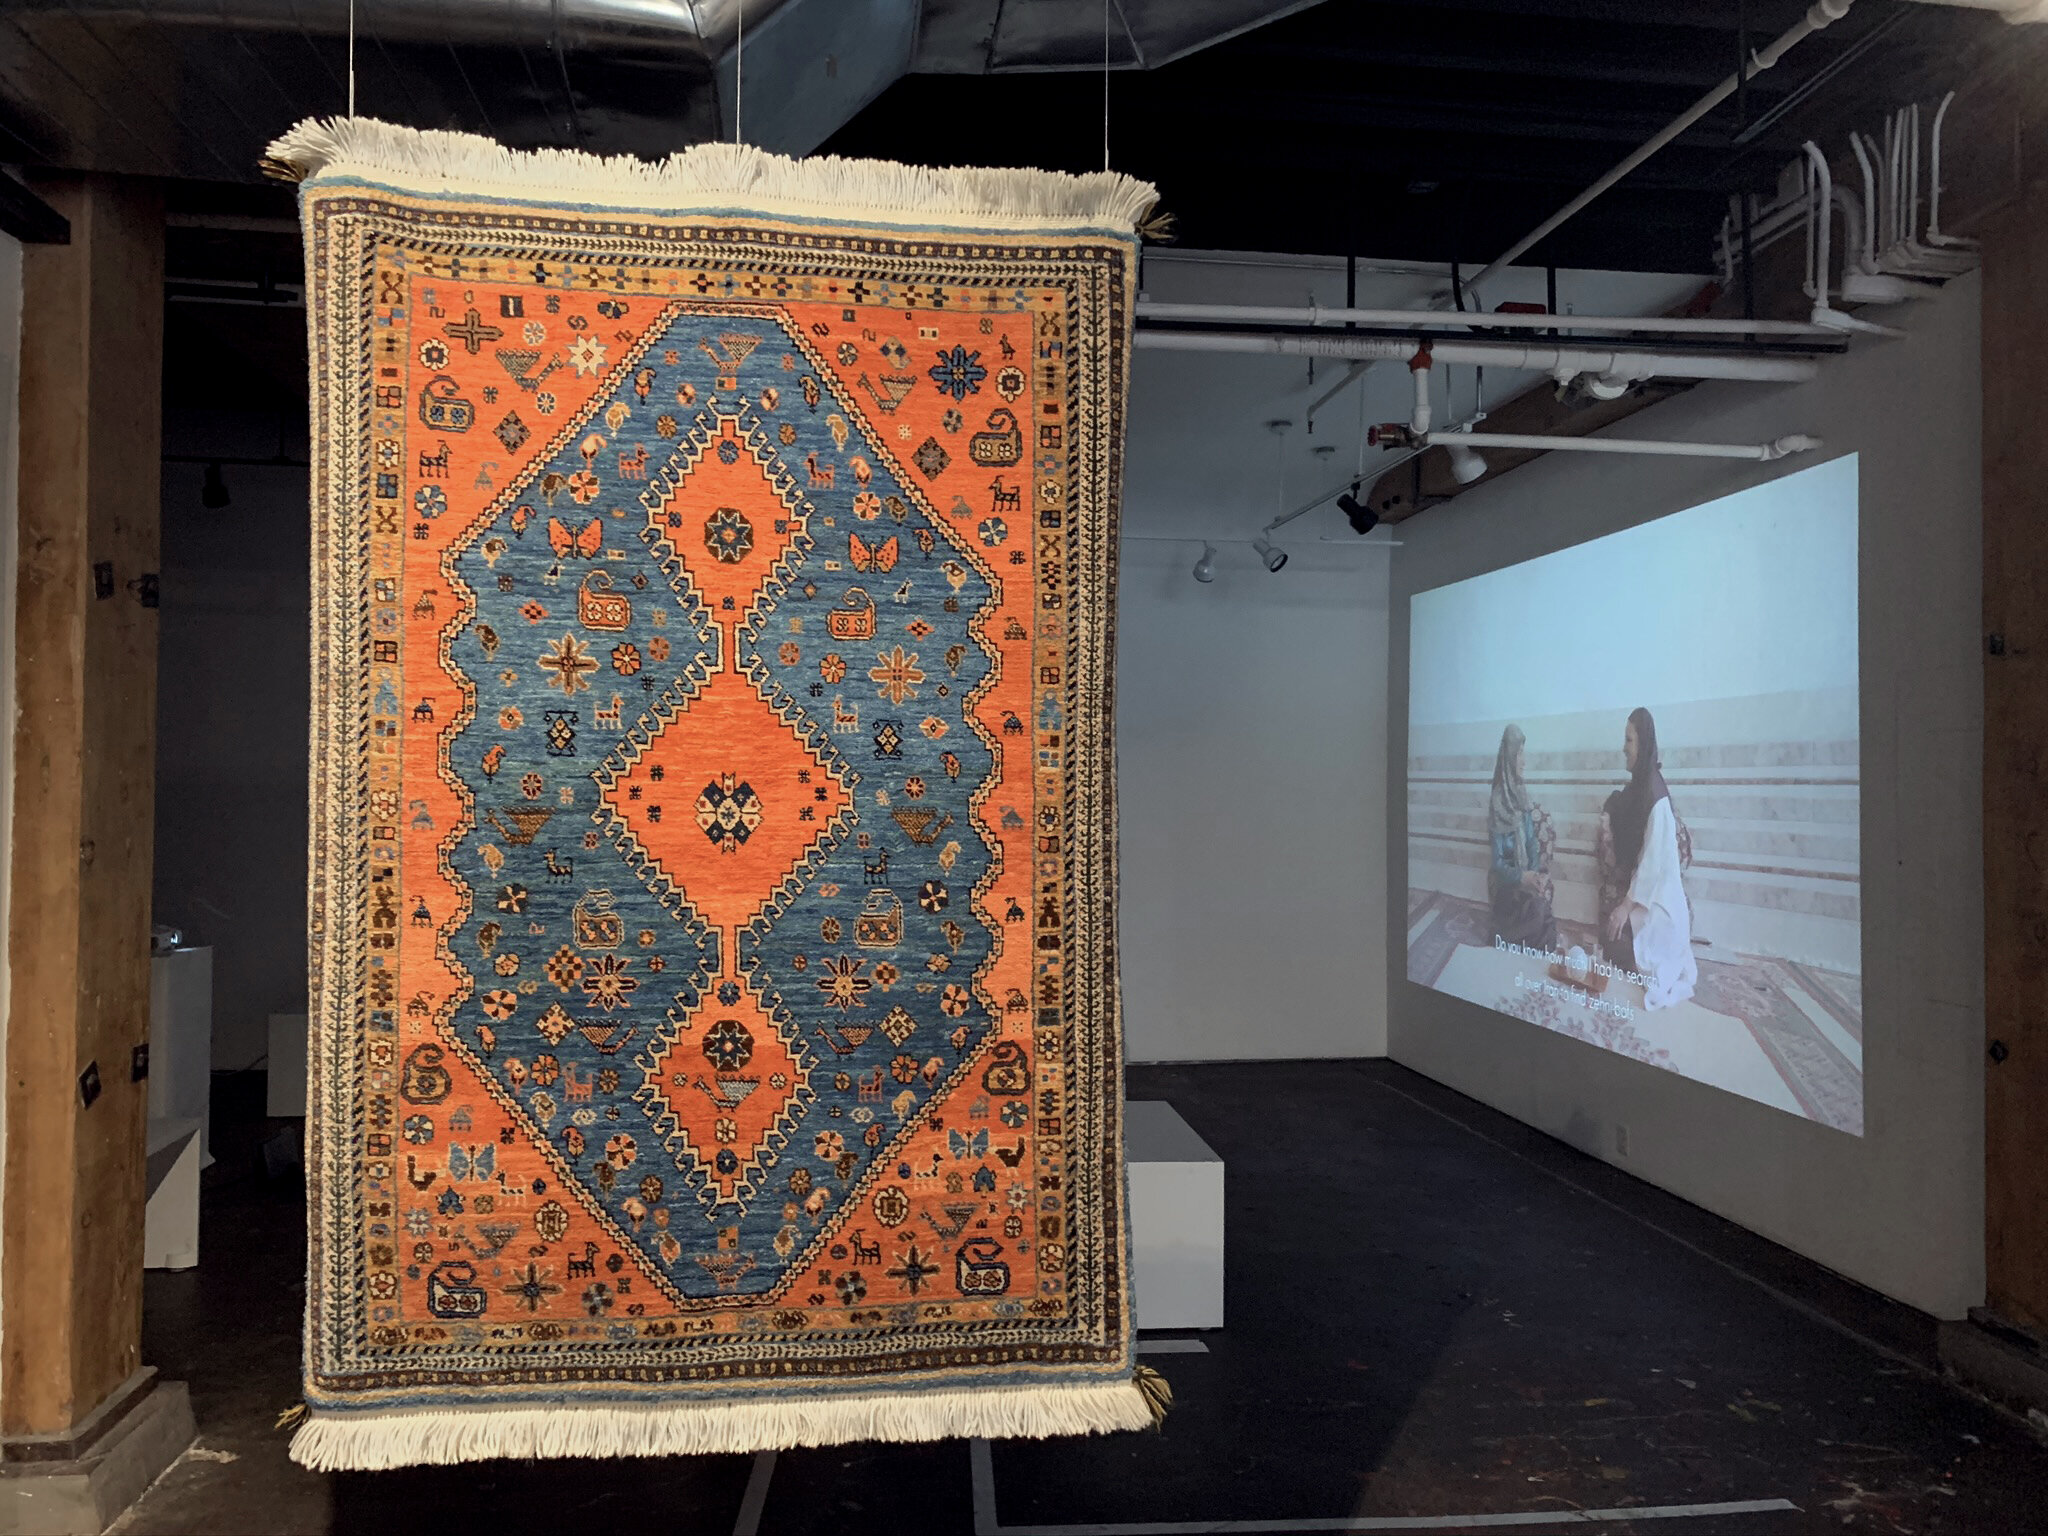 Exhibitions — New York Textile Month